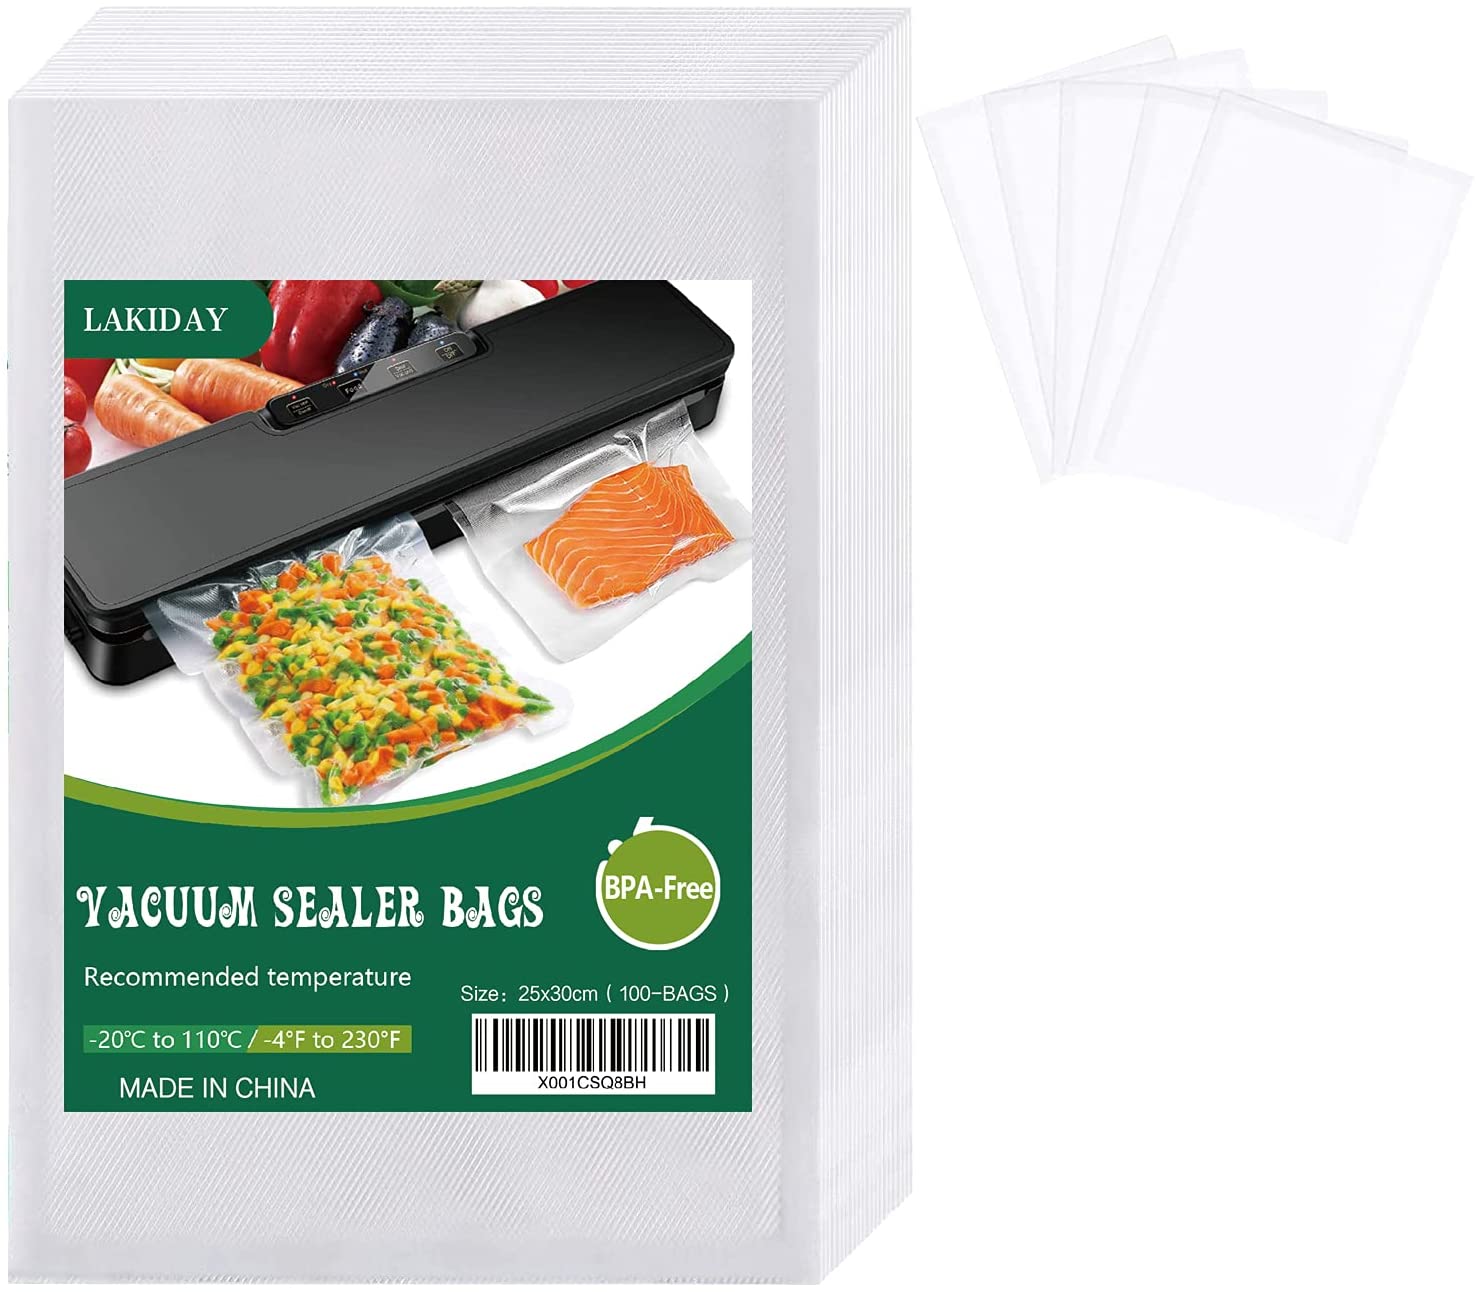 LAKIDAY Vacuum Rolls Foil Rolls BPA-Free for All Vacuum Sealers, Strong & T